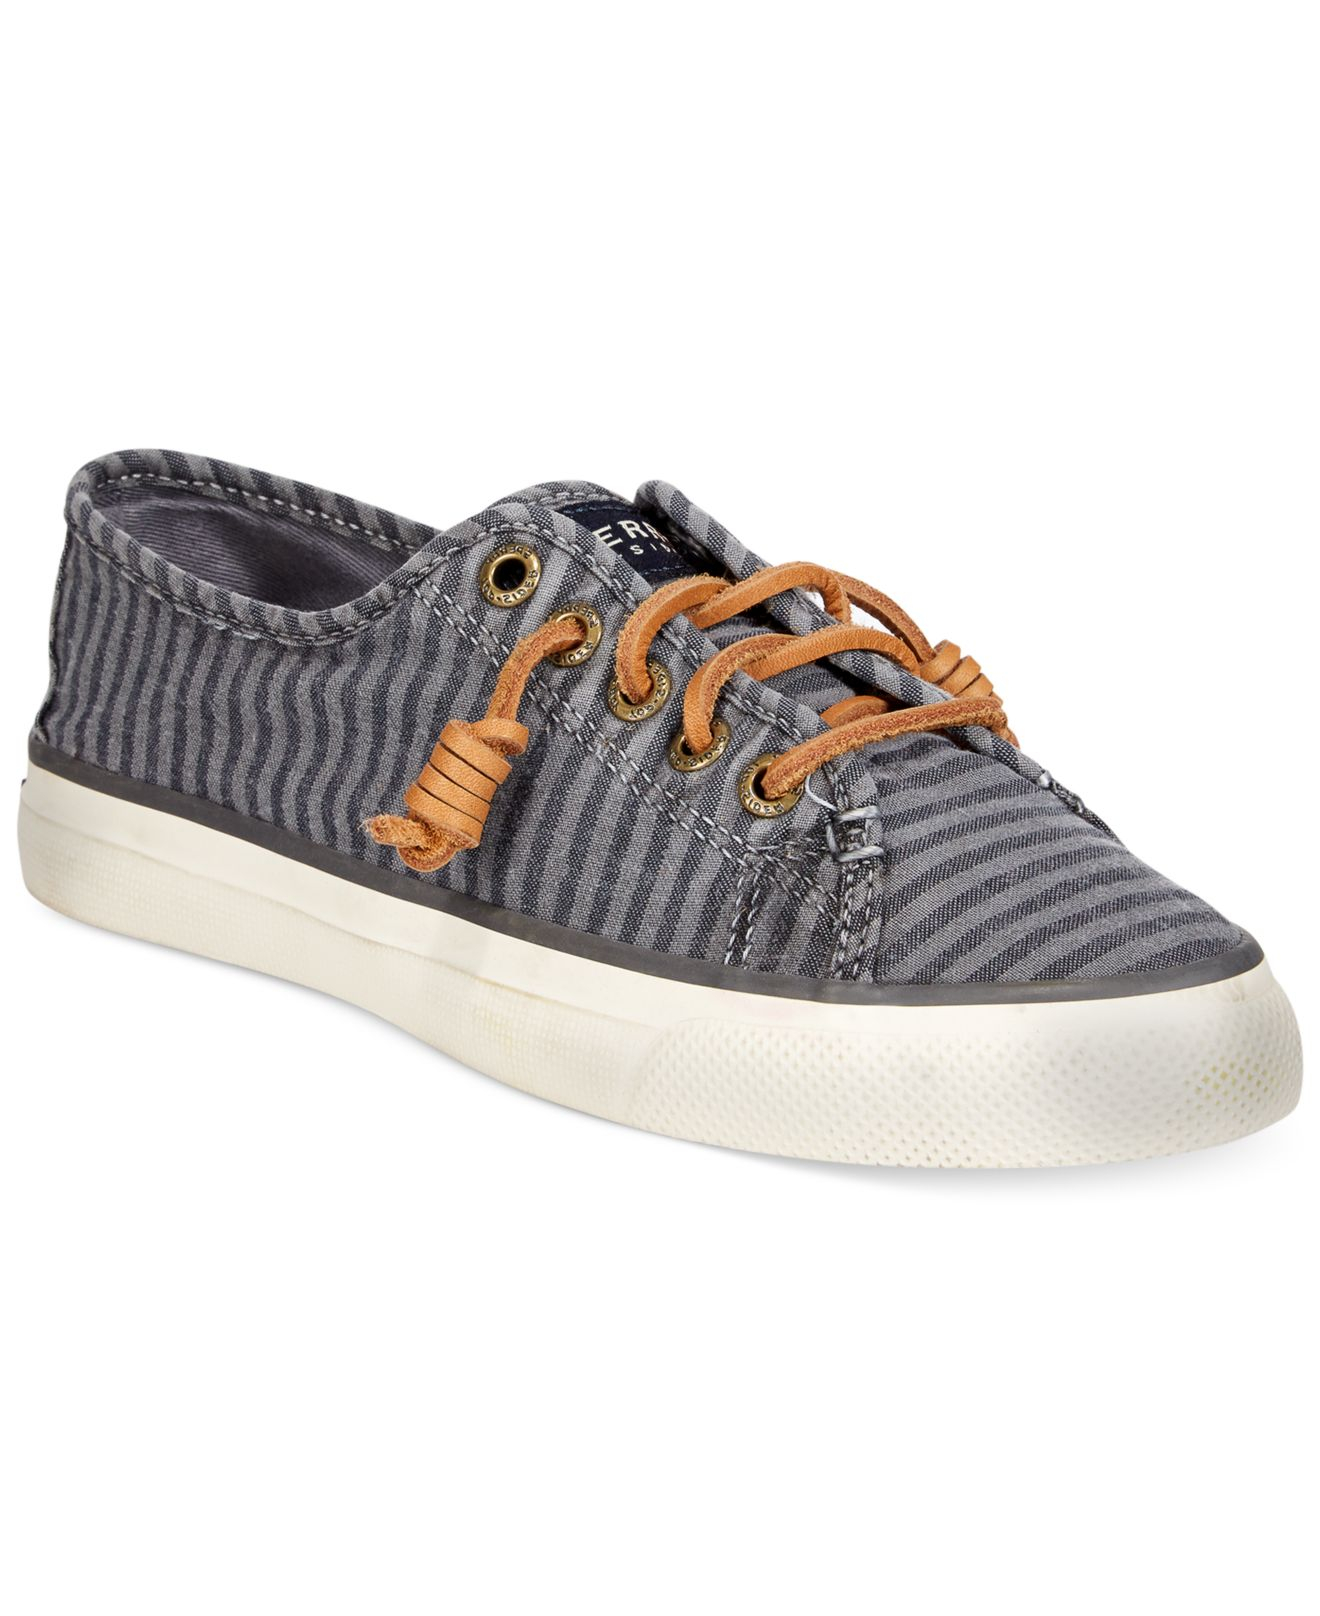 Lyst - Sperry Top-Sider Women's Seacoast Canvas Sneakers in Gray